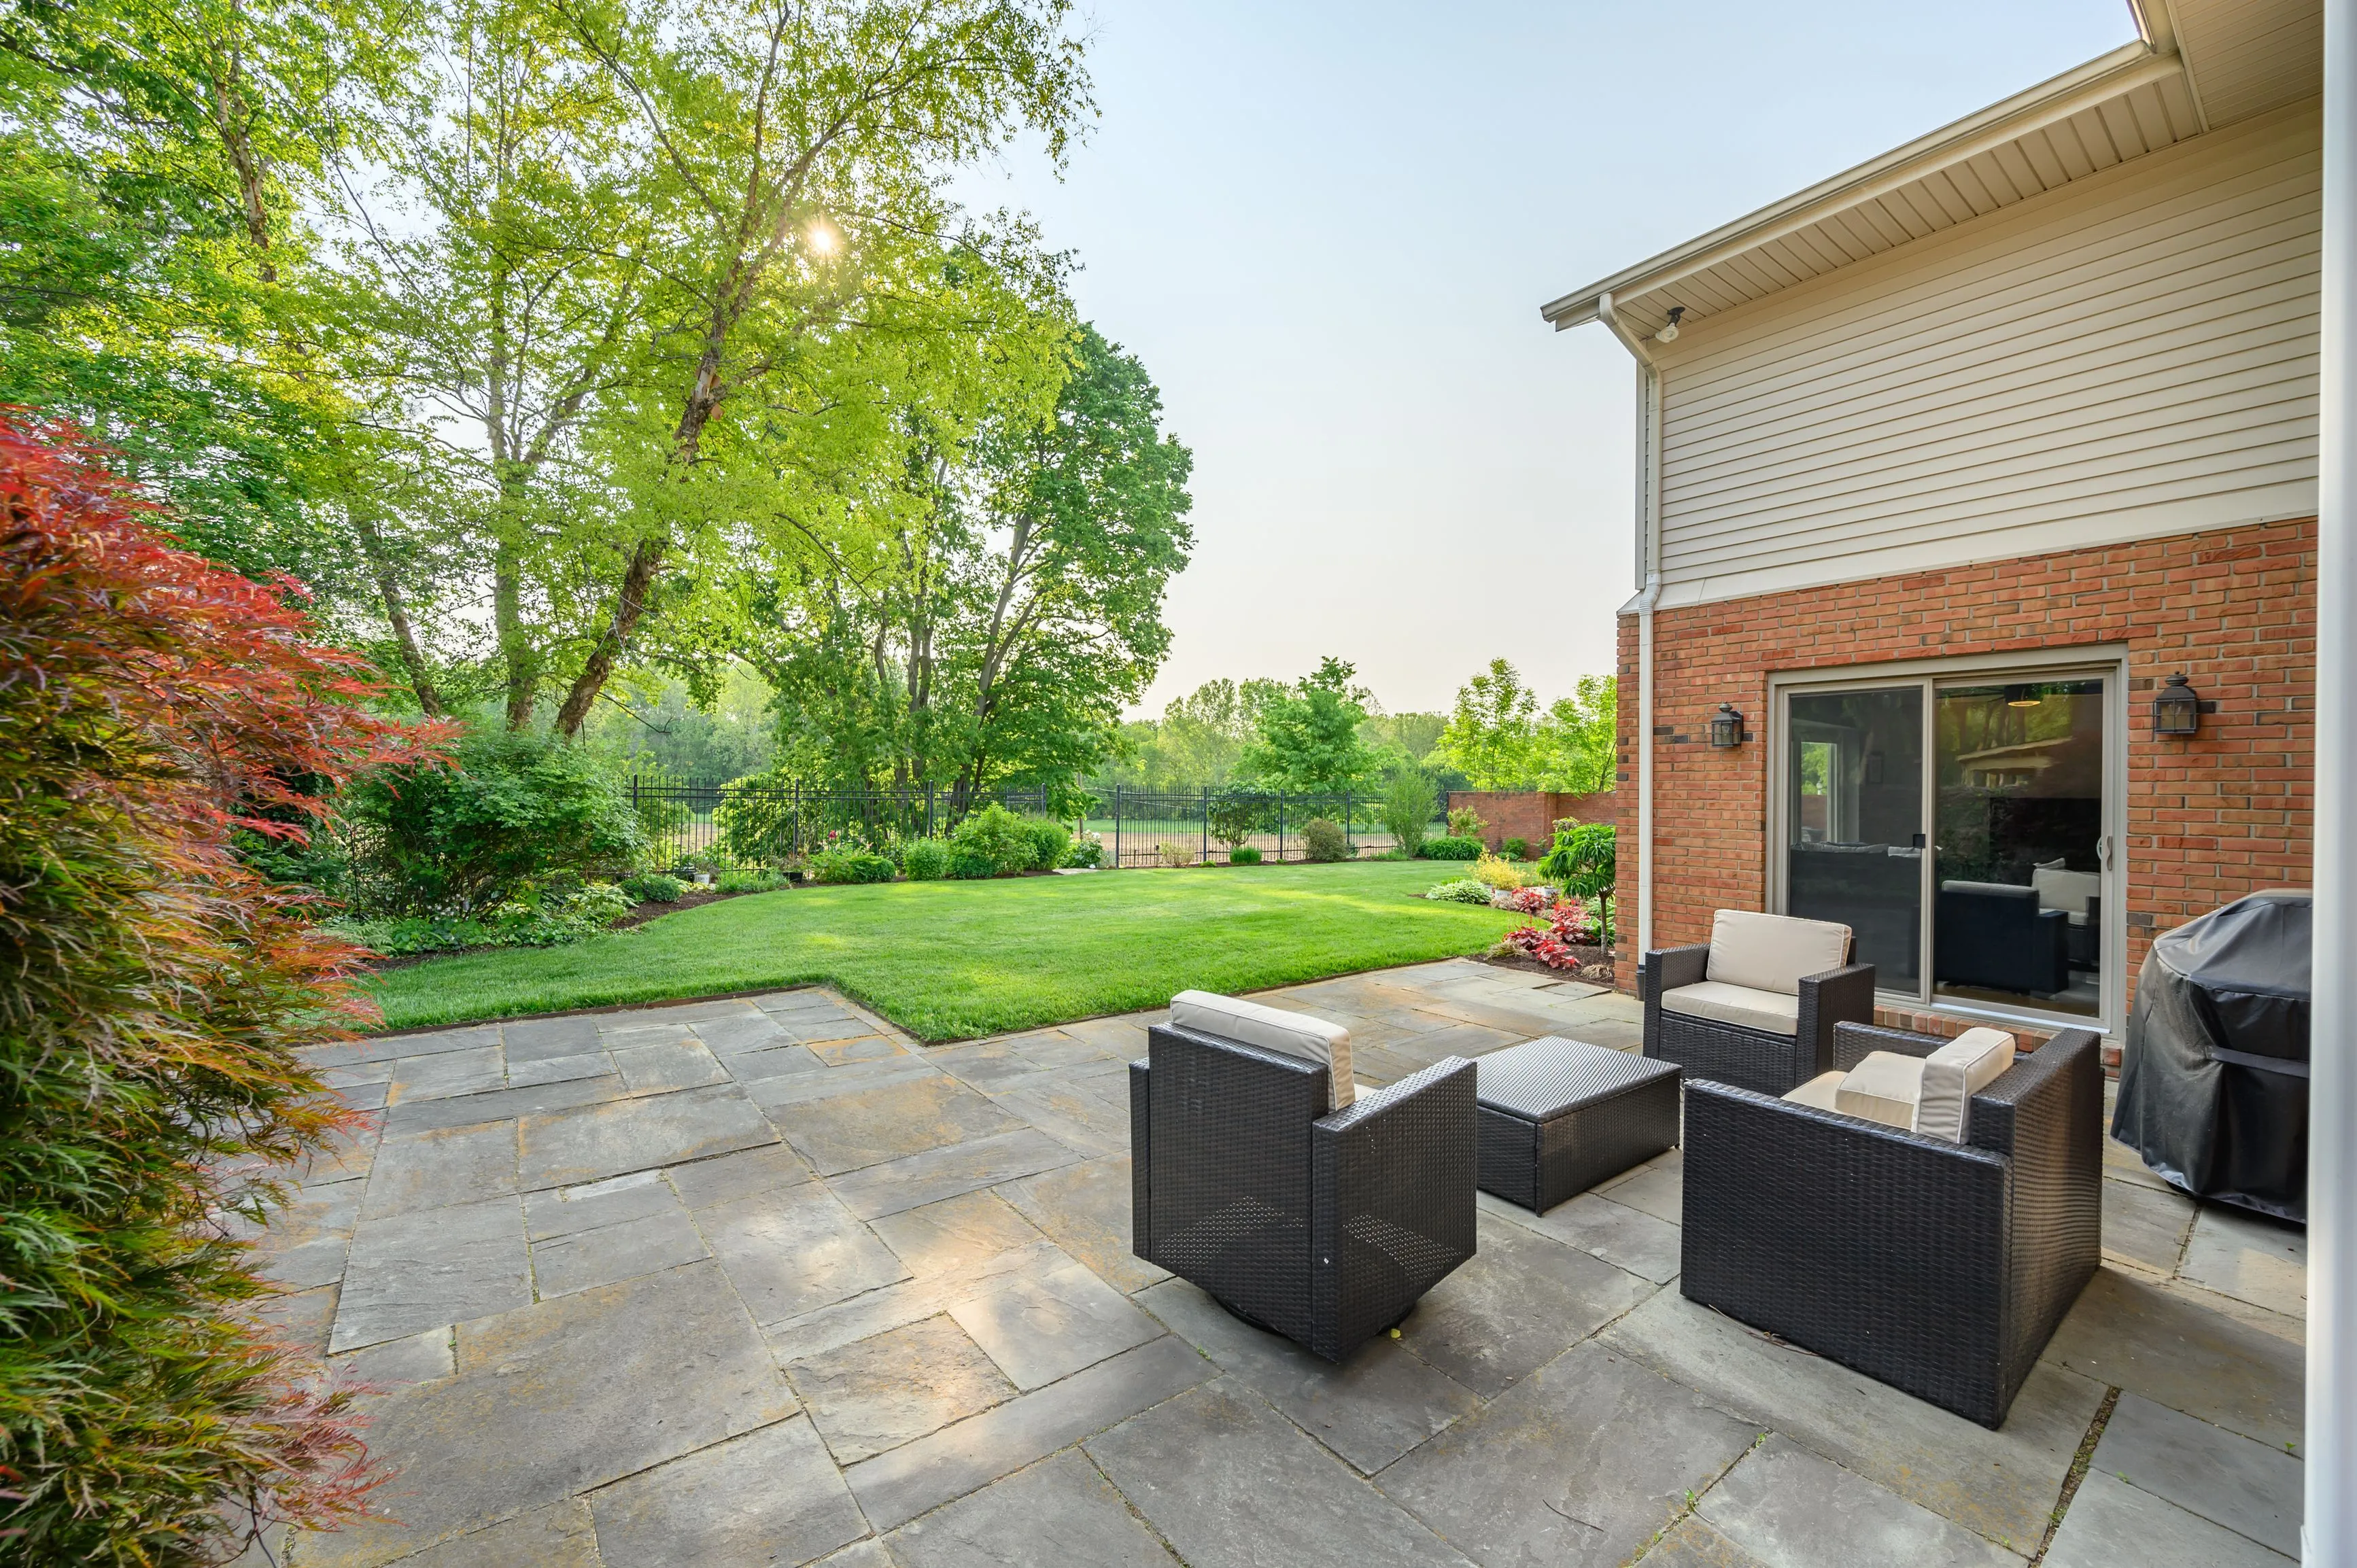 Patio furniture on stone pavers with a well-manicured lawn and trees in the background.